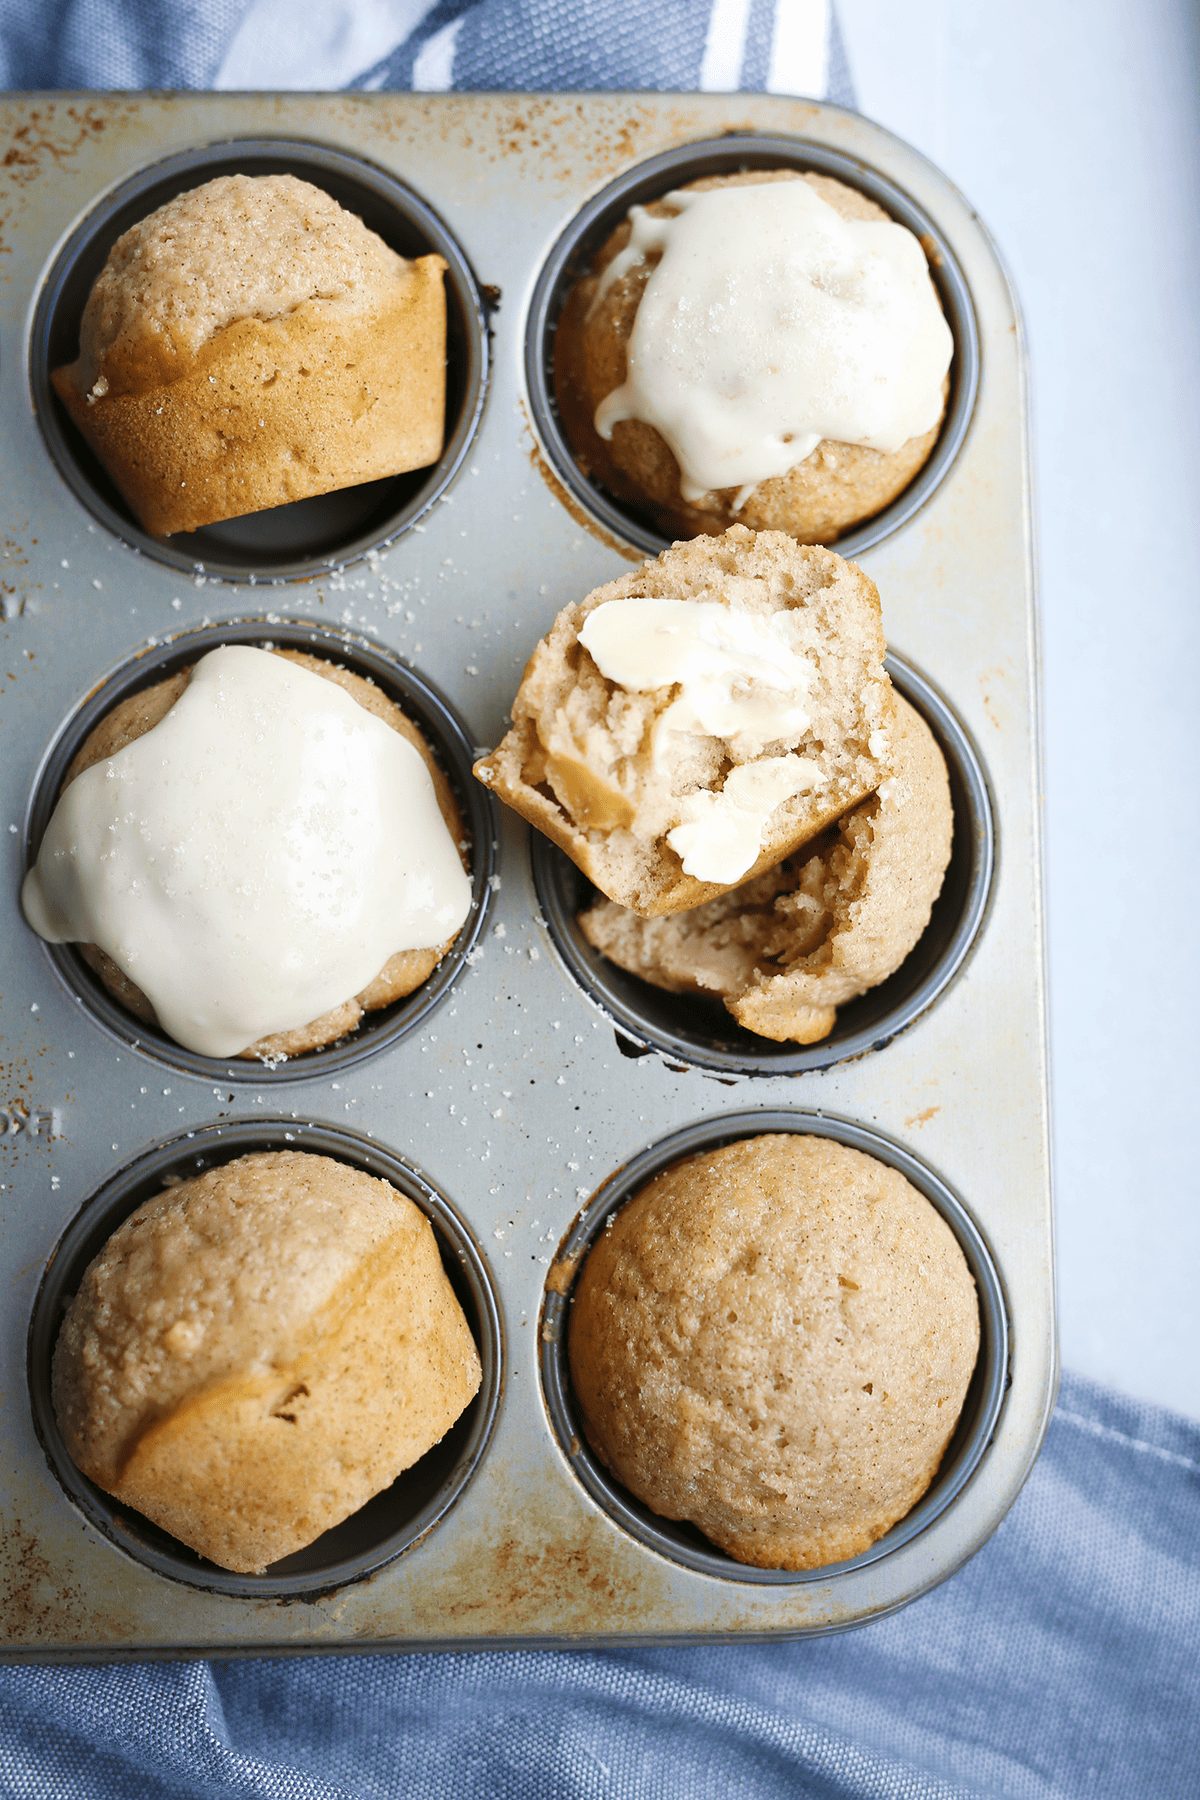 These homemade Apple Cider Muffins are super easy and yum! Soft and moist inside with a sweet glaze on the top! Vegan and flavorful.